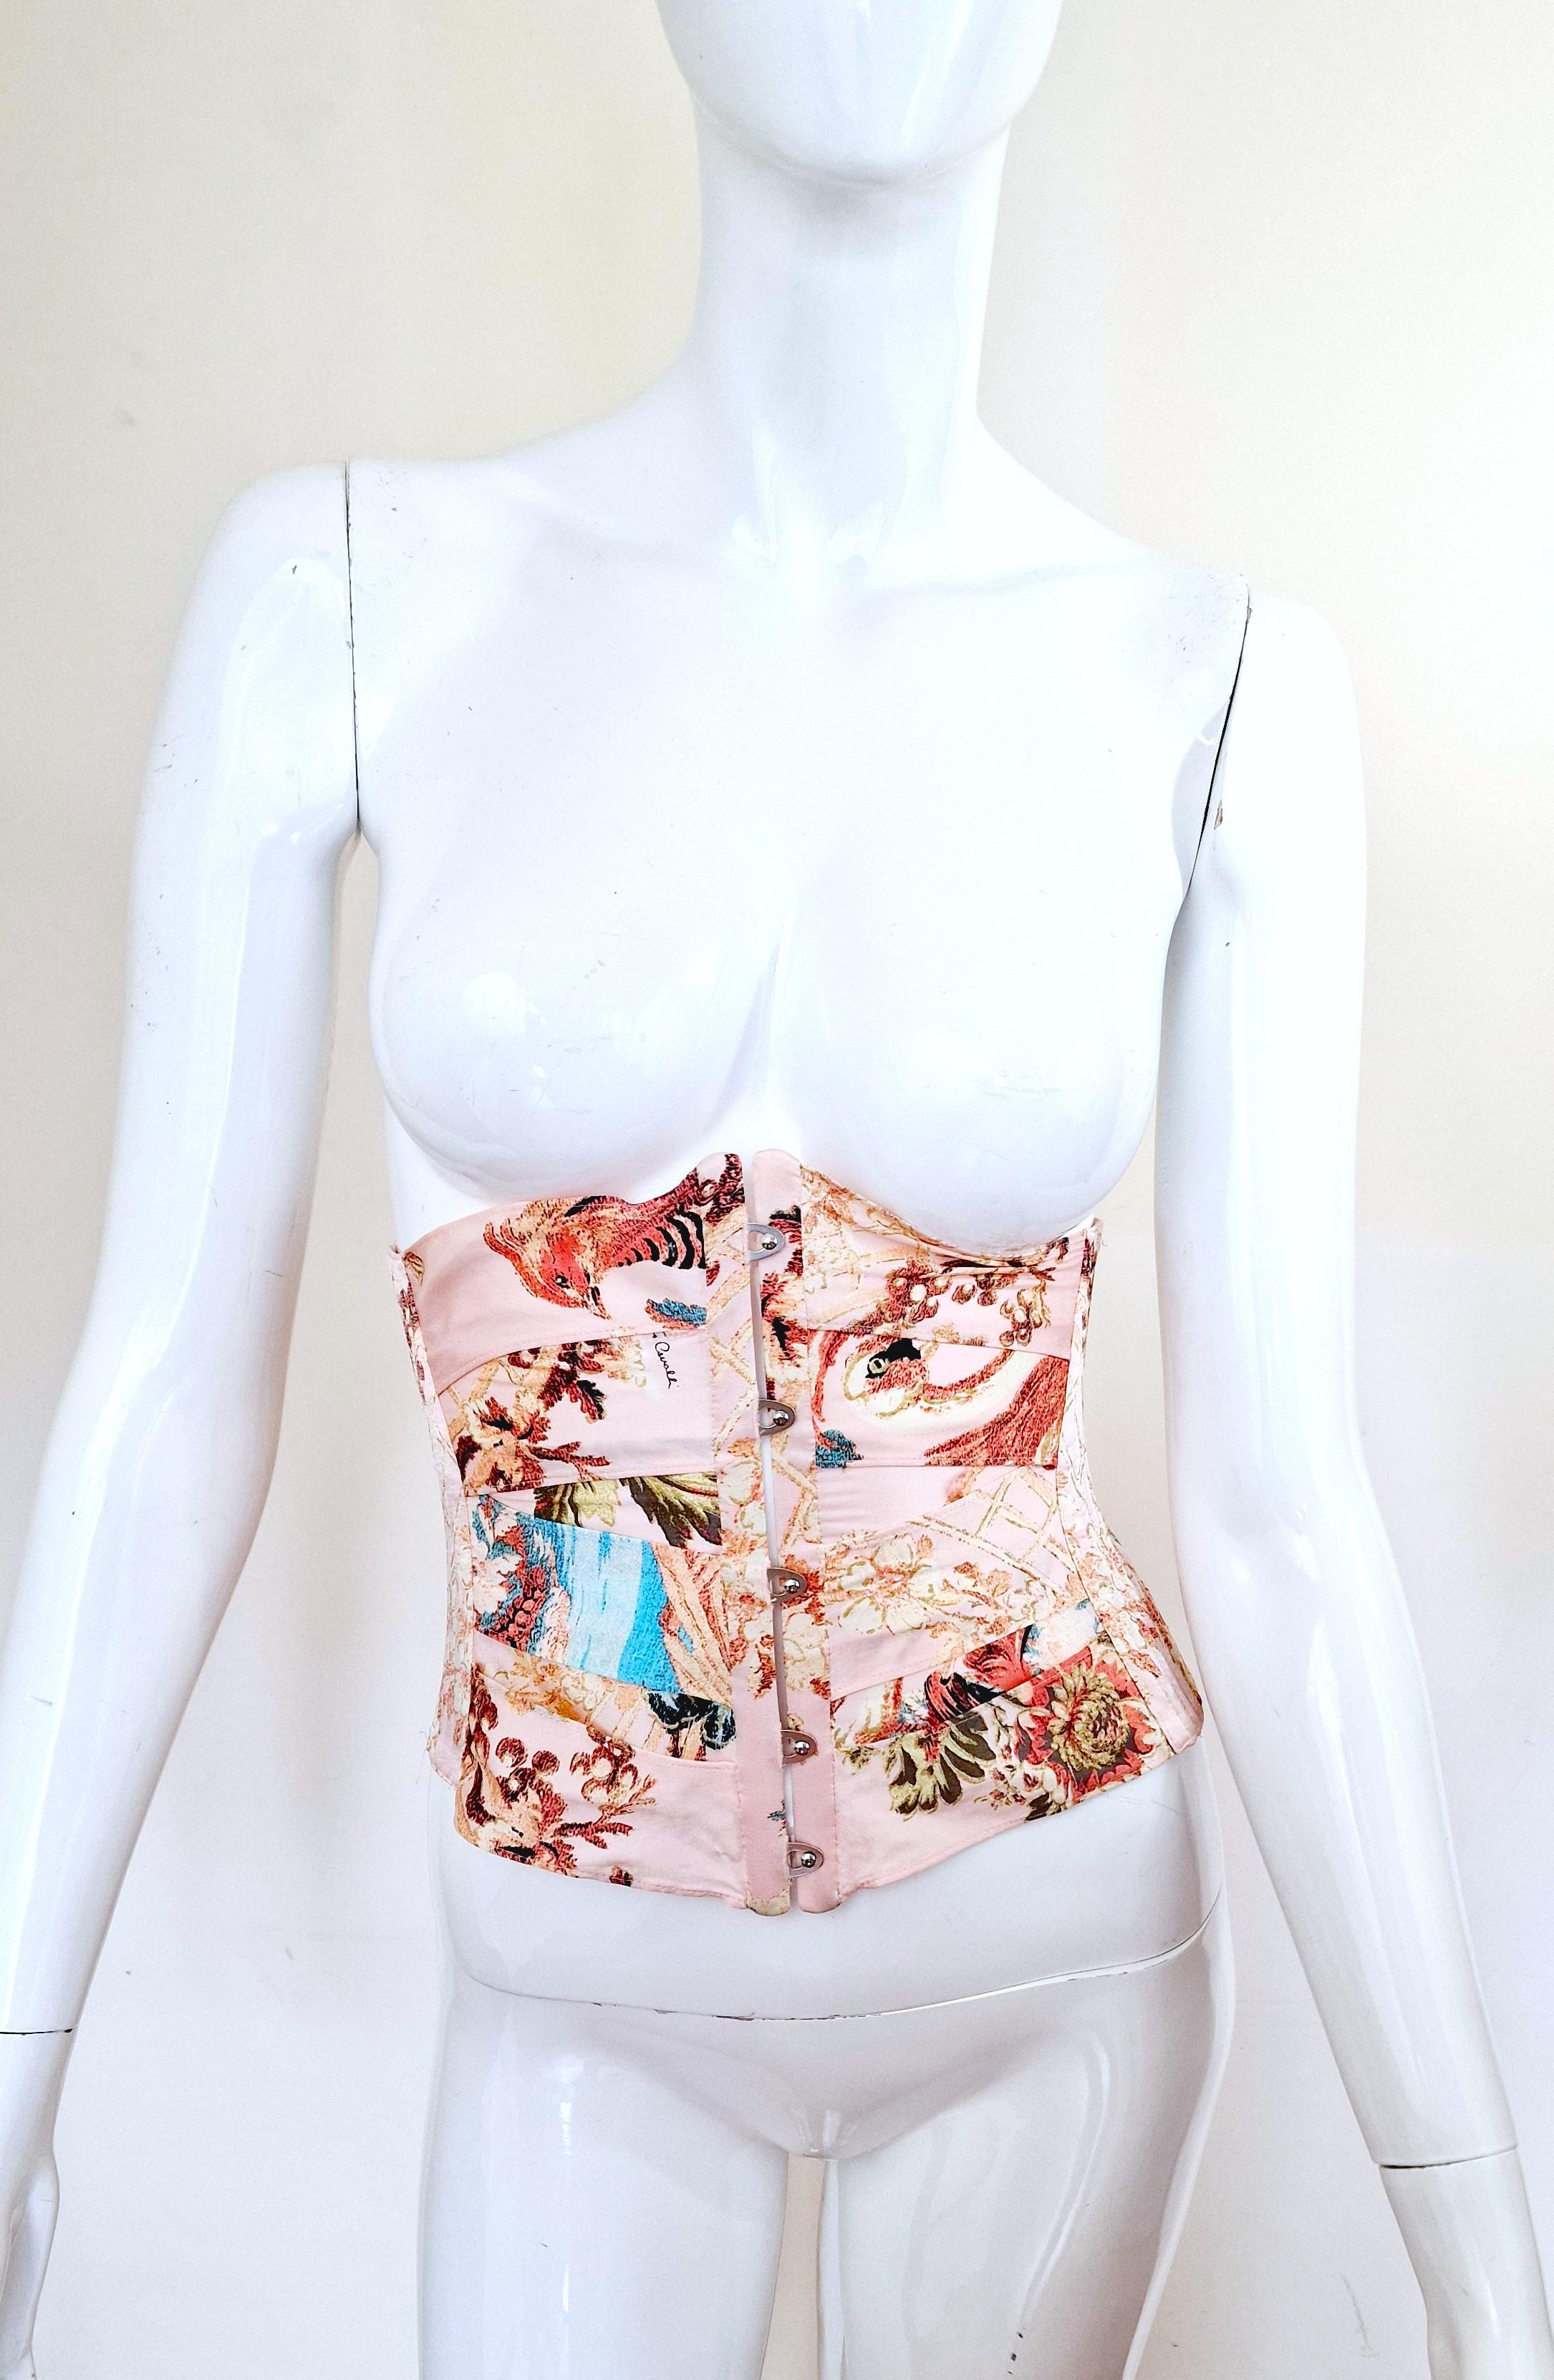 Runway waist cincher by Roberto Cavalli!
This iconic waist cincher from the Roberto Cavalli S/S 2003 collection was also featured on the runway. The cincher is also held on display at the Museum at FIT.
Panel layers! 
100% silk!

VERY GOOD